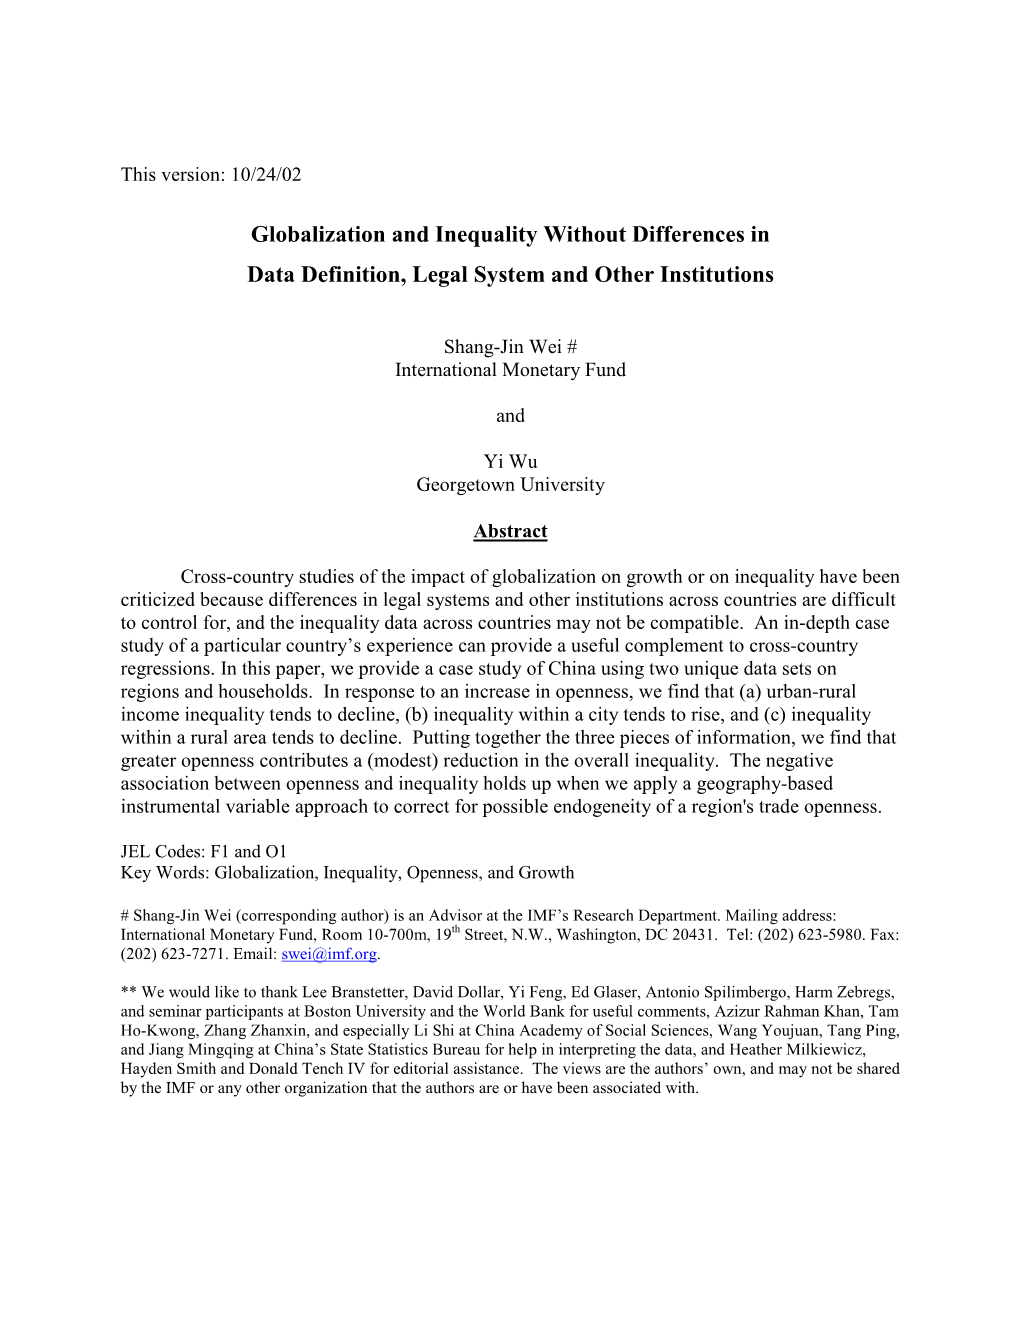 Globalization and Inequality Without Differences in Data Definition, Legal System and Other Institutions